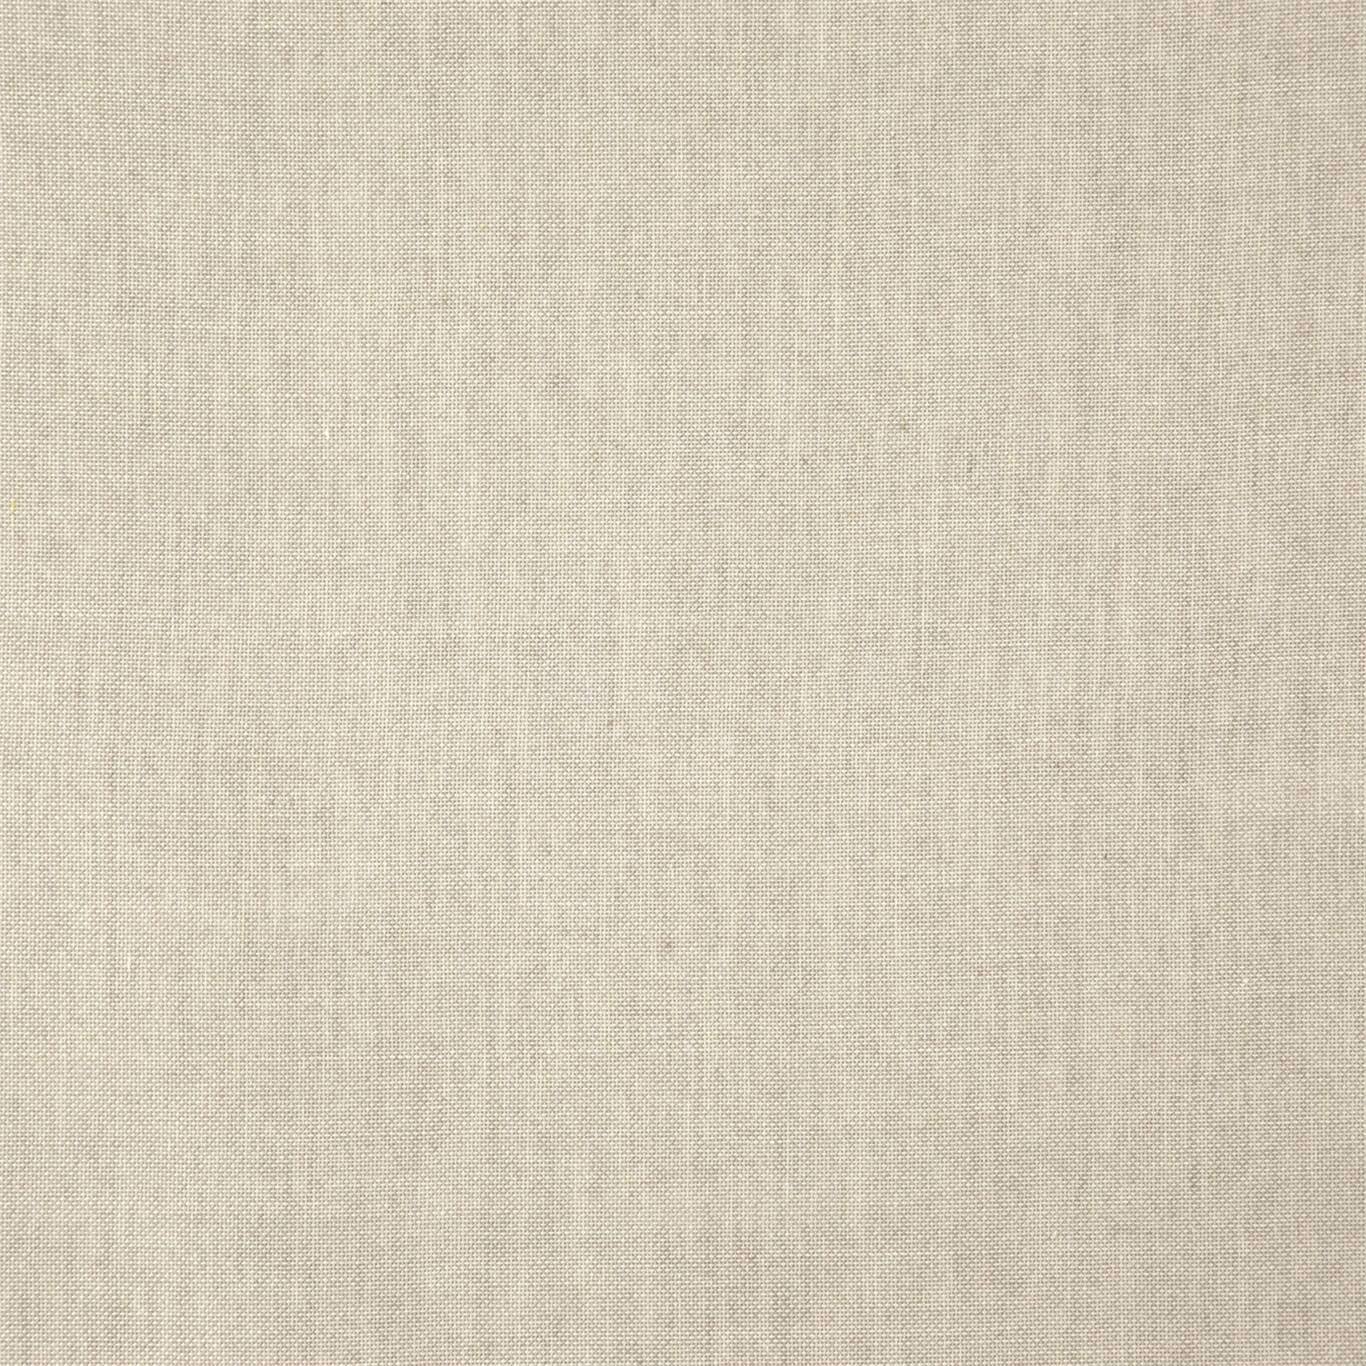 Chance Fabric by Harlequin - HHAR143063 - Sand